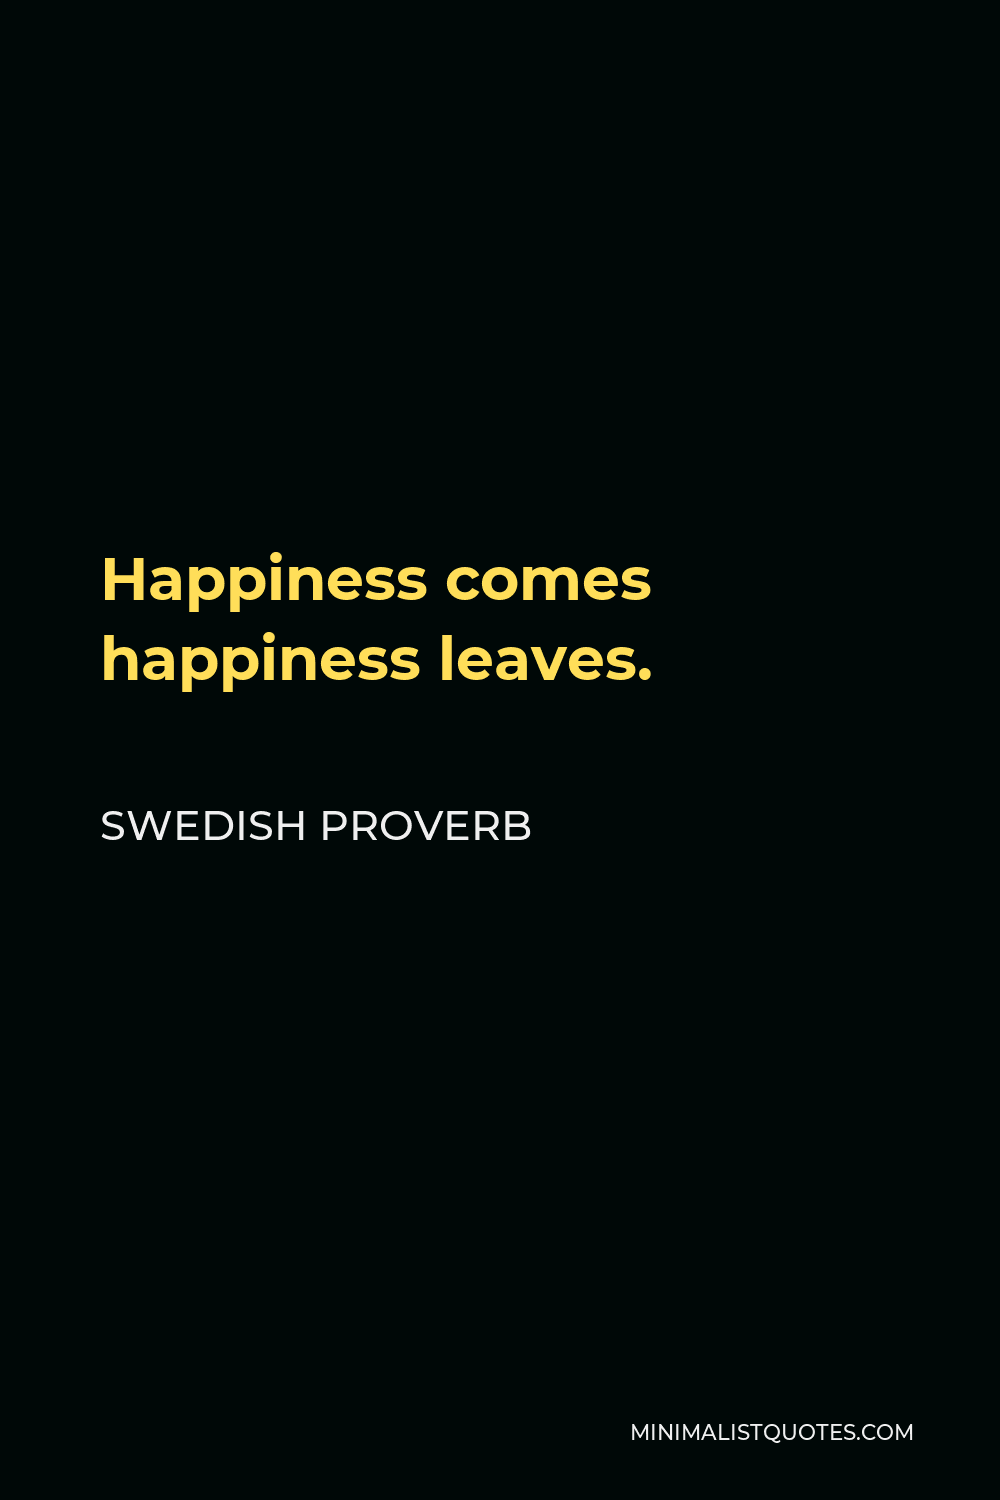 Swedish Proverb Quote - Happiness comes happiness leaves.